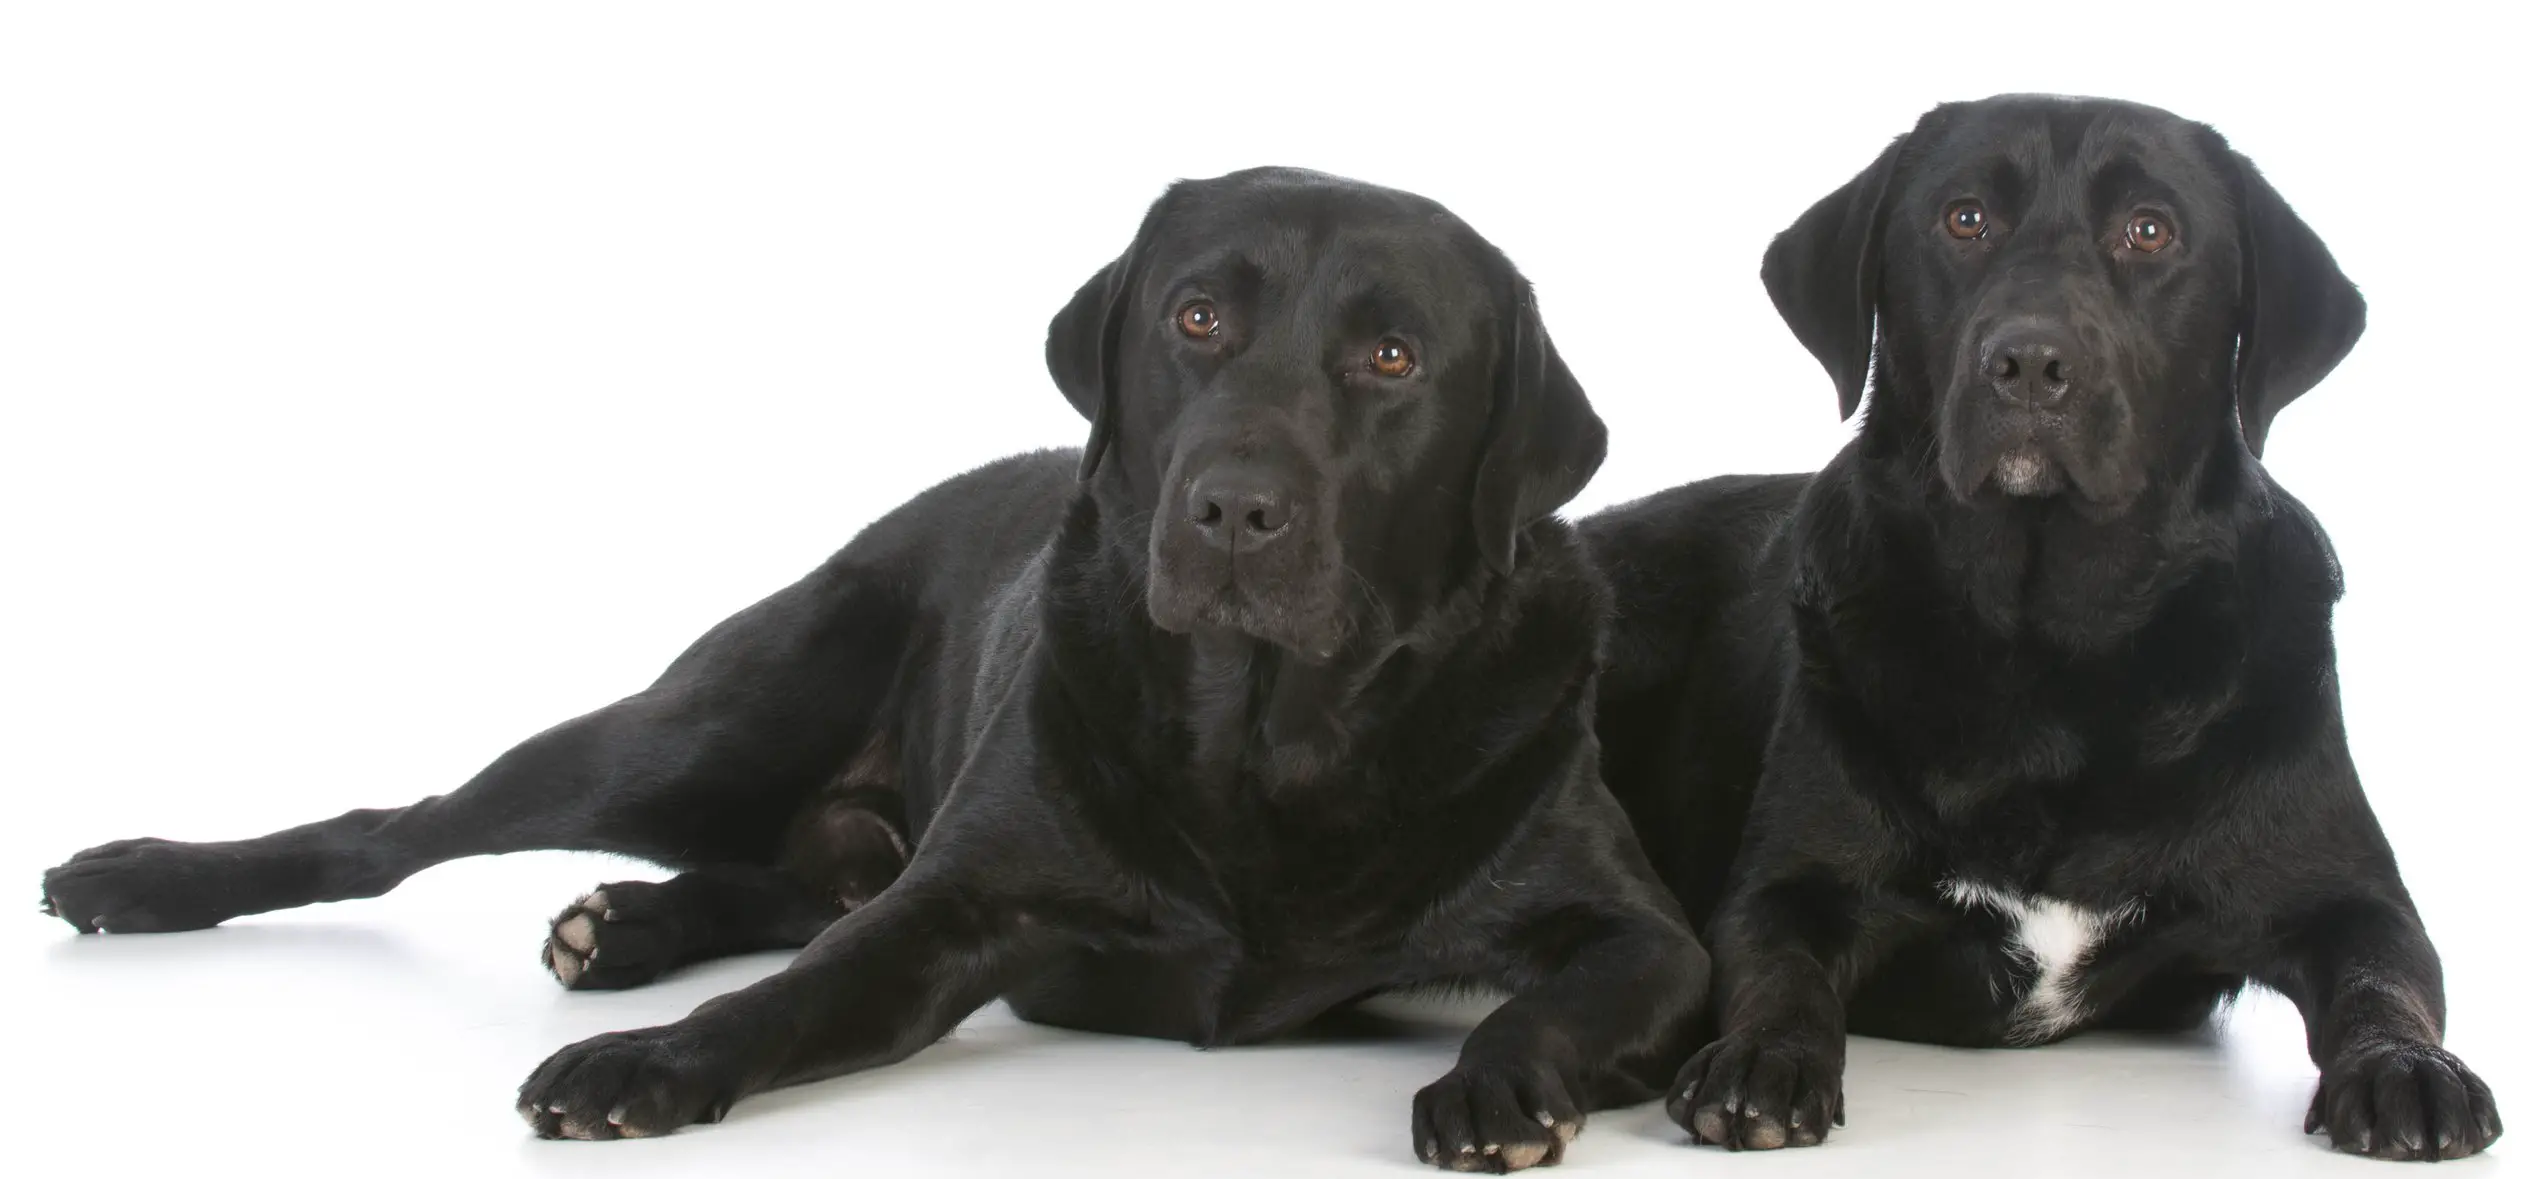 Can a Purebred Lab Have White Markings? - EtcPets